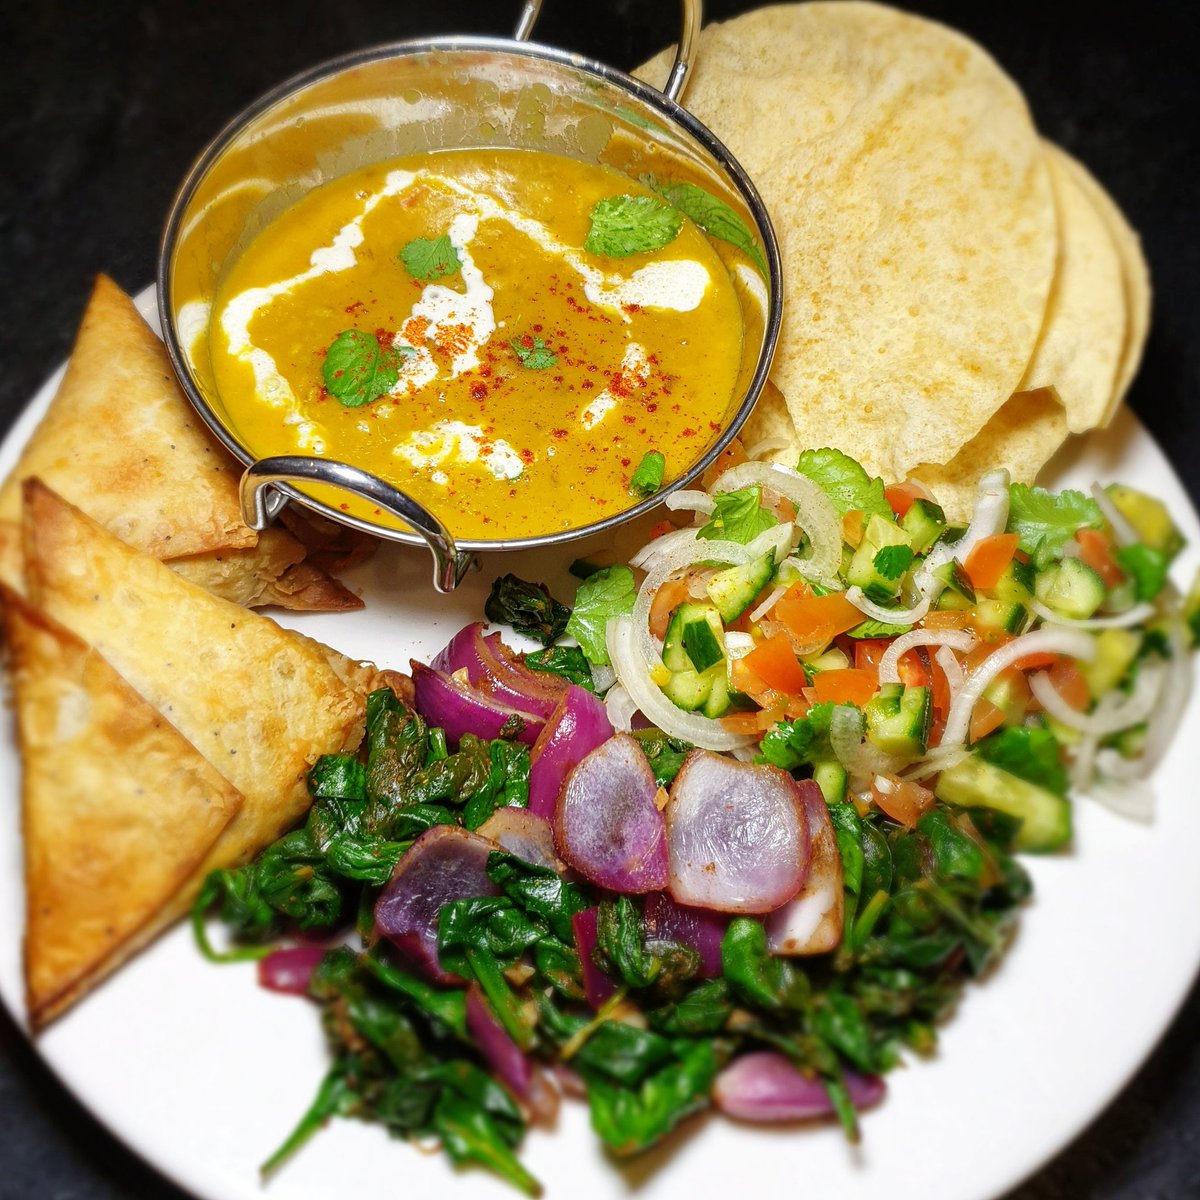 Indian Food Night. 🇮🇳. 
.
Tadka Dal (lentils & spices).
.
Vegetable Somosas.
.
Spinach & Red Onion Bhaji.
.
Onion & Tomato 🍅 Salad & Poppadoms.
.
Which one would you eat first? 
.
#indianfood #indianvegan #vegan